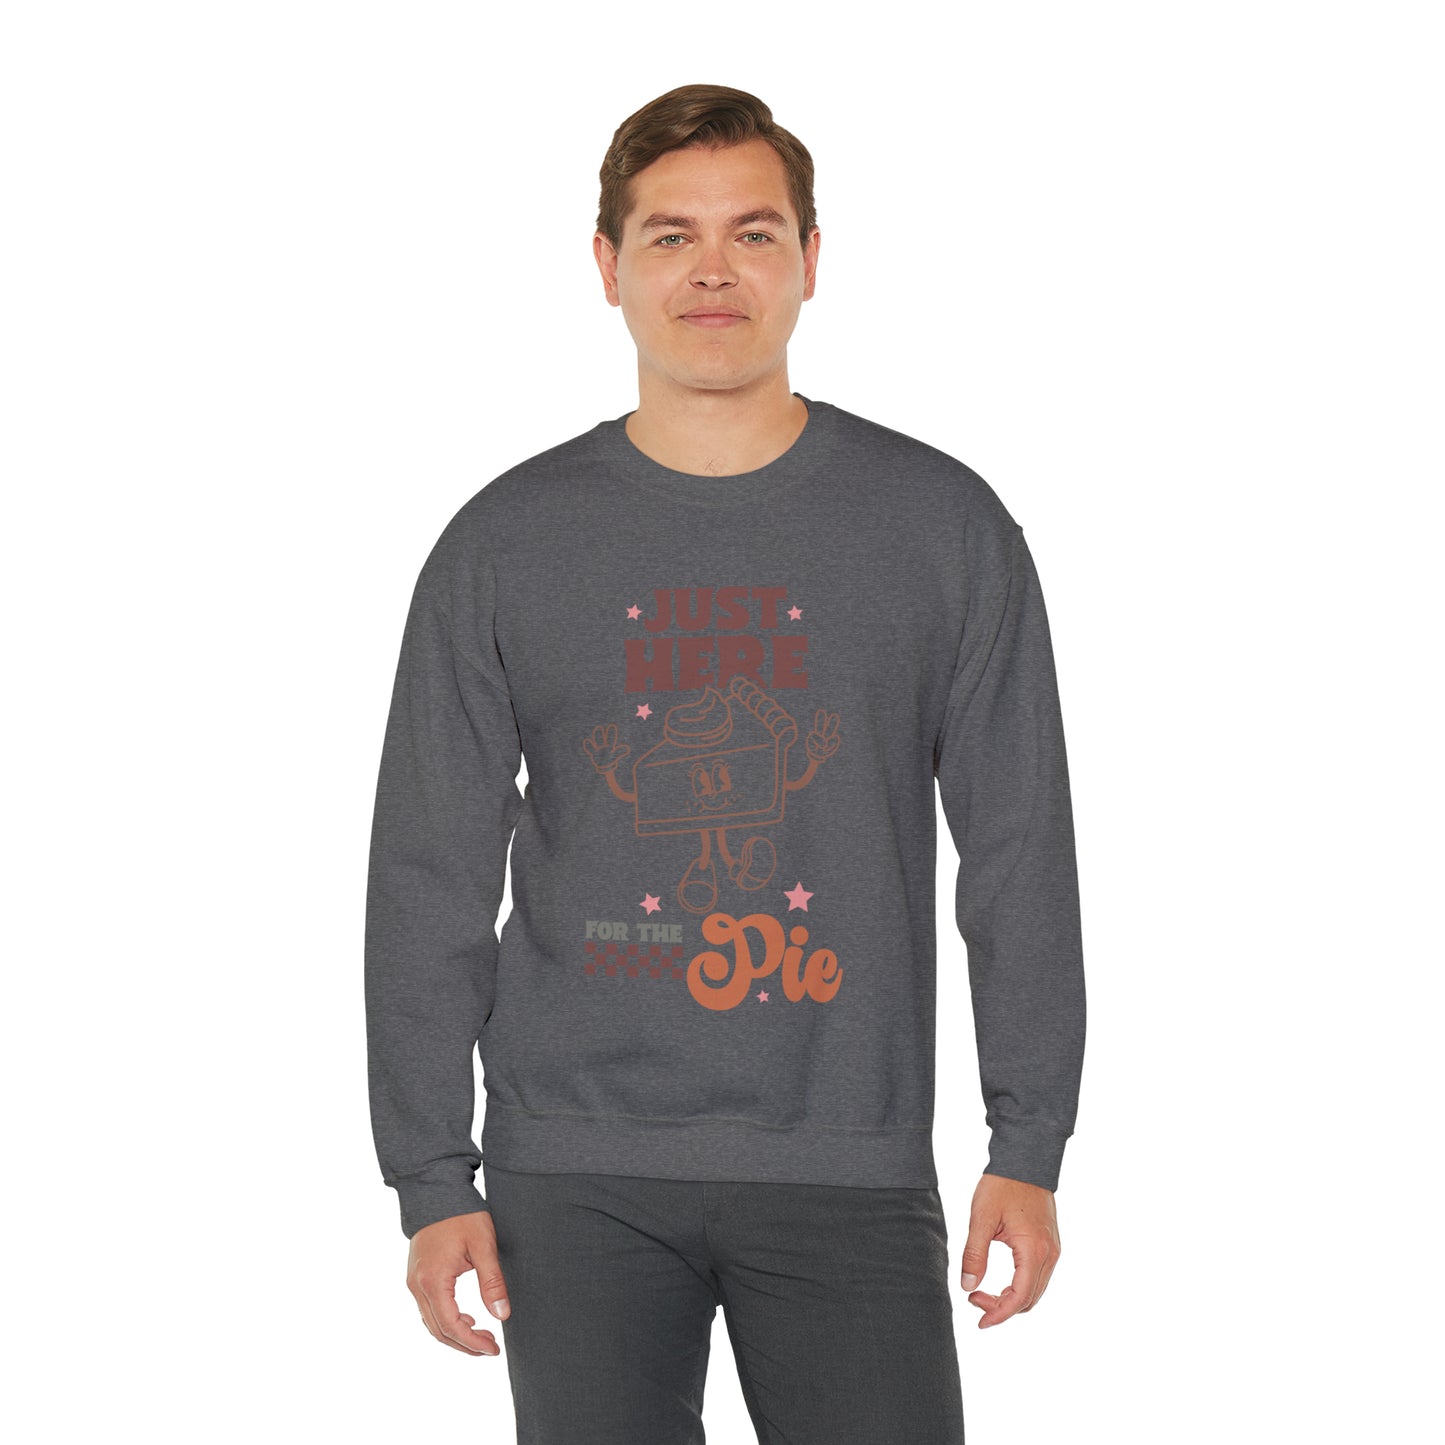 Just Here For The Pie | Unisex Thanksgiving Crewneck Sweatshirt | Thanksgiving Funny Sweatshirt